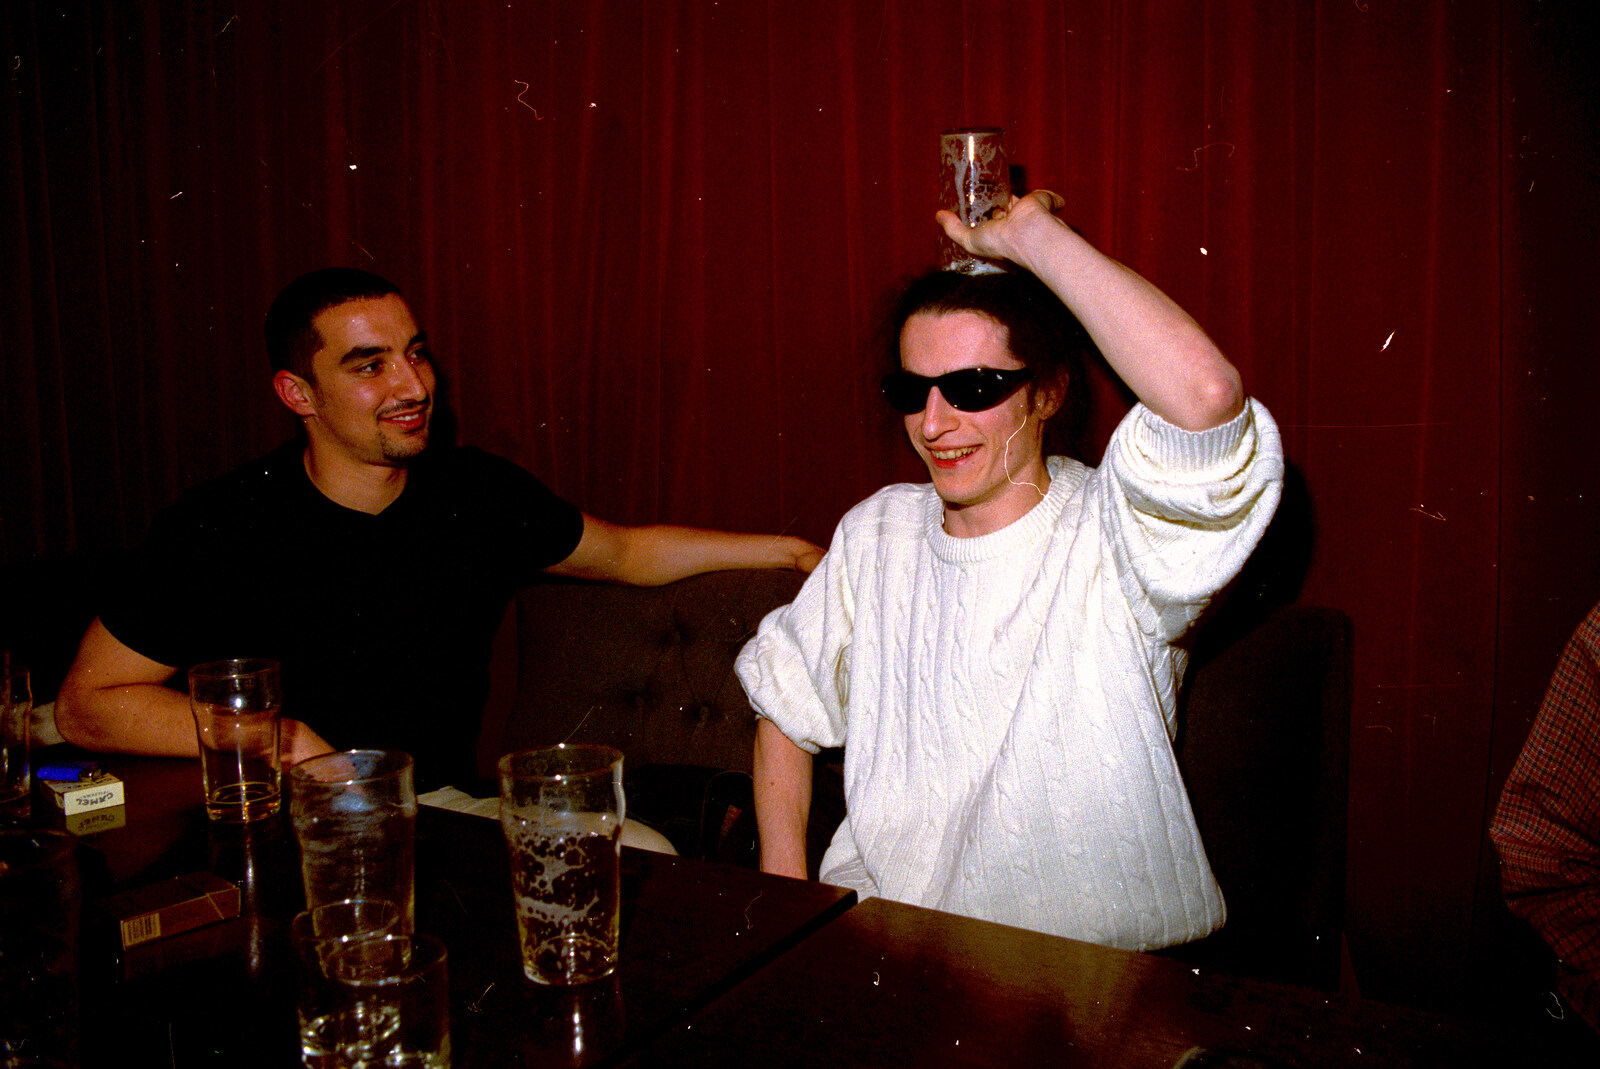 CISU Plays Cardinal's Hat in the SCC Social Club, Ipswich, Suffolk - 3rd August 1997: Frenchie puts a glass on the head